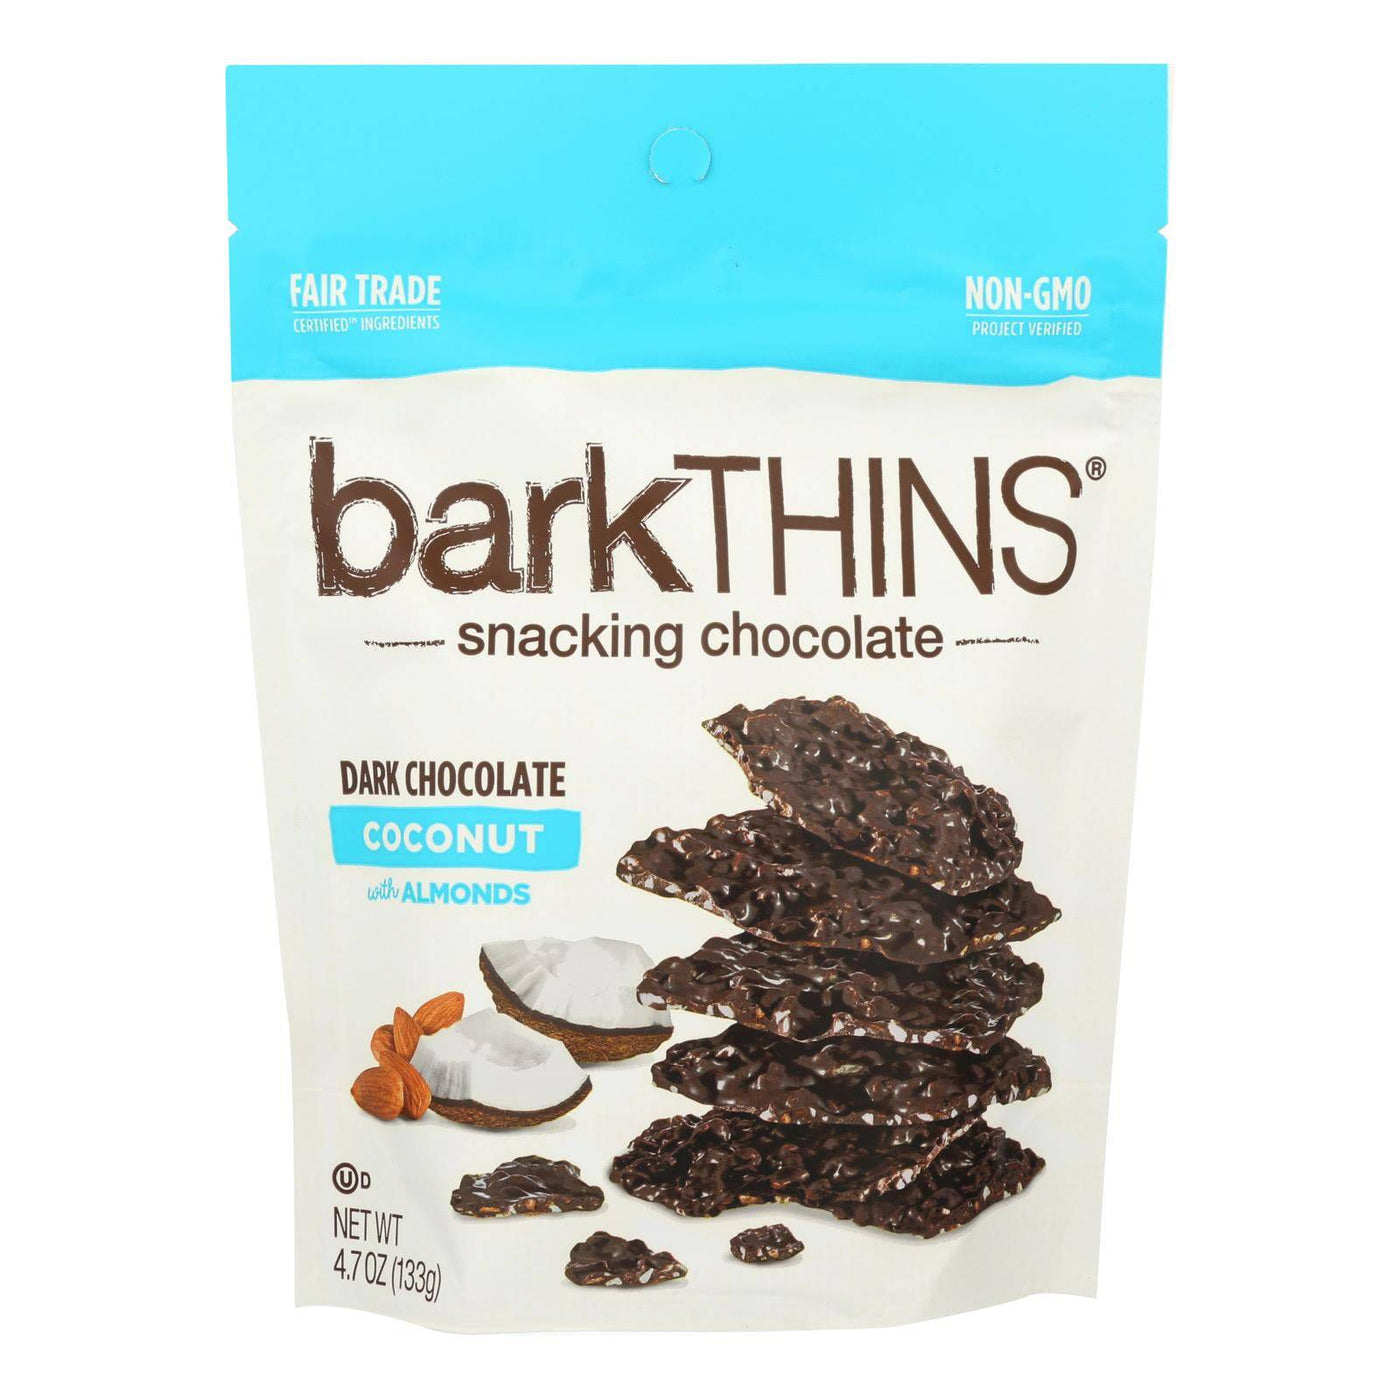 Buy Bark Thins Snacking Chocolate - Dark Chocolate Toasted Coconut With Almonds - Case Of 12 - 4.7 Oz.  at OnlyNaturals.us